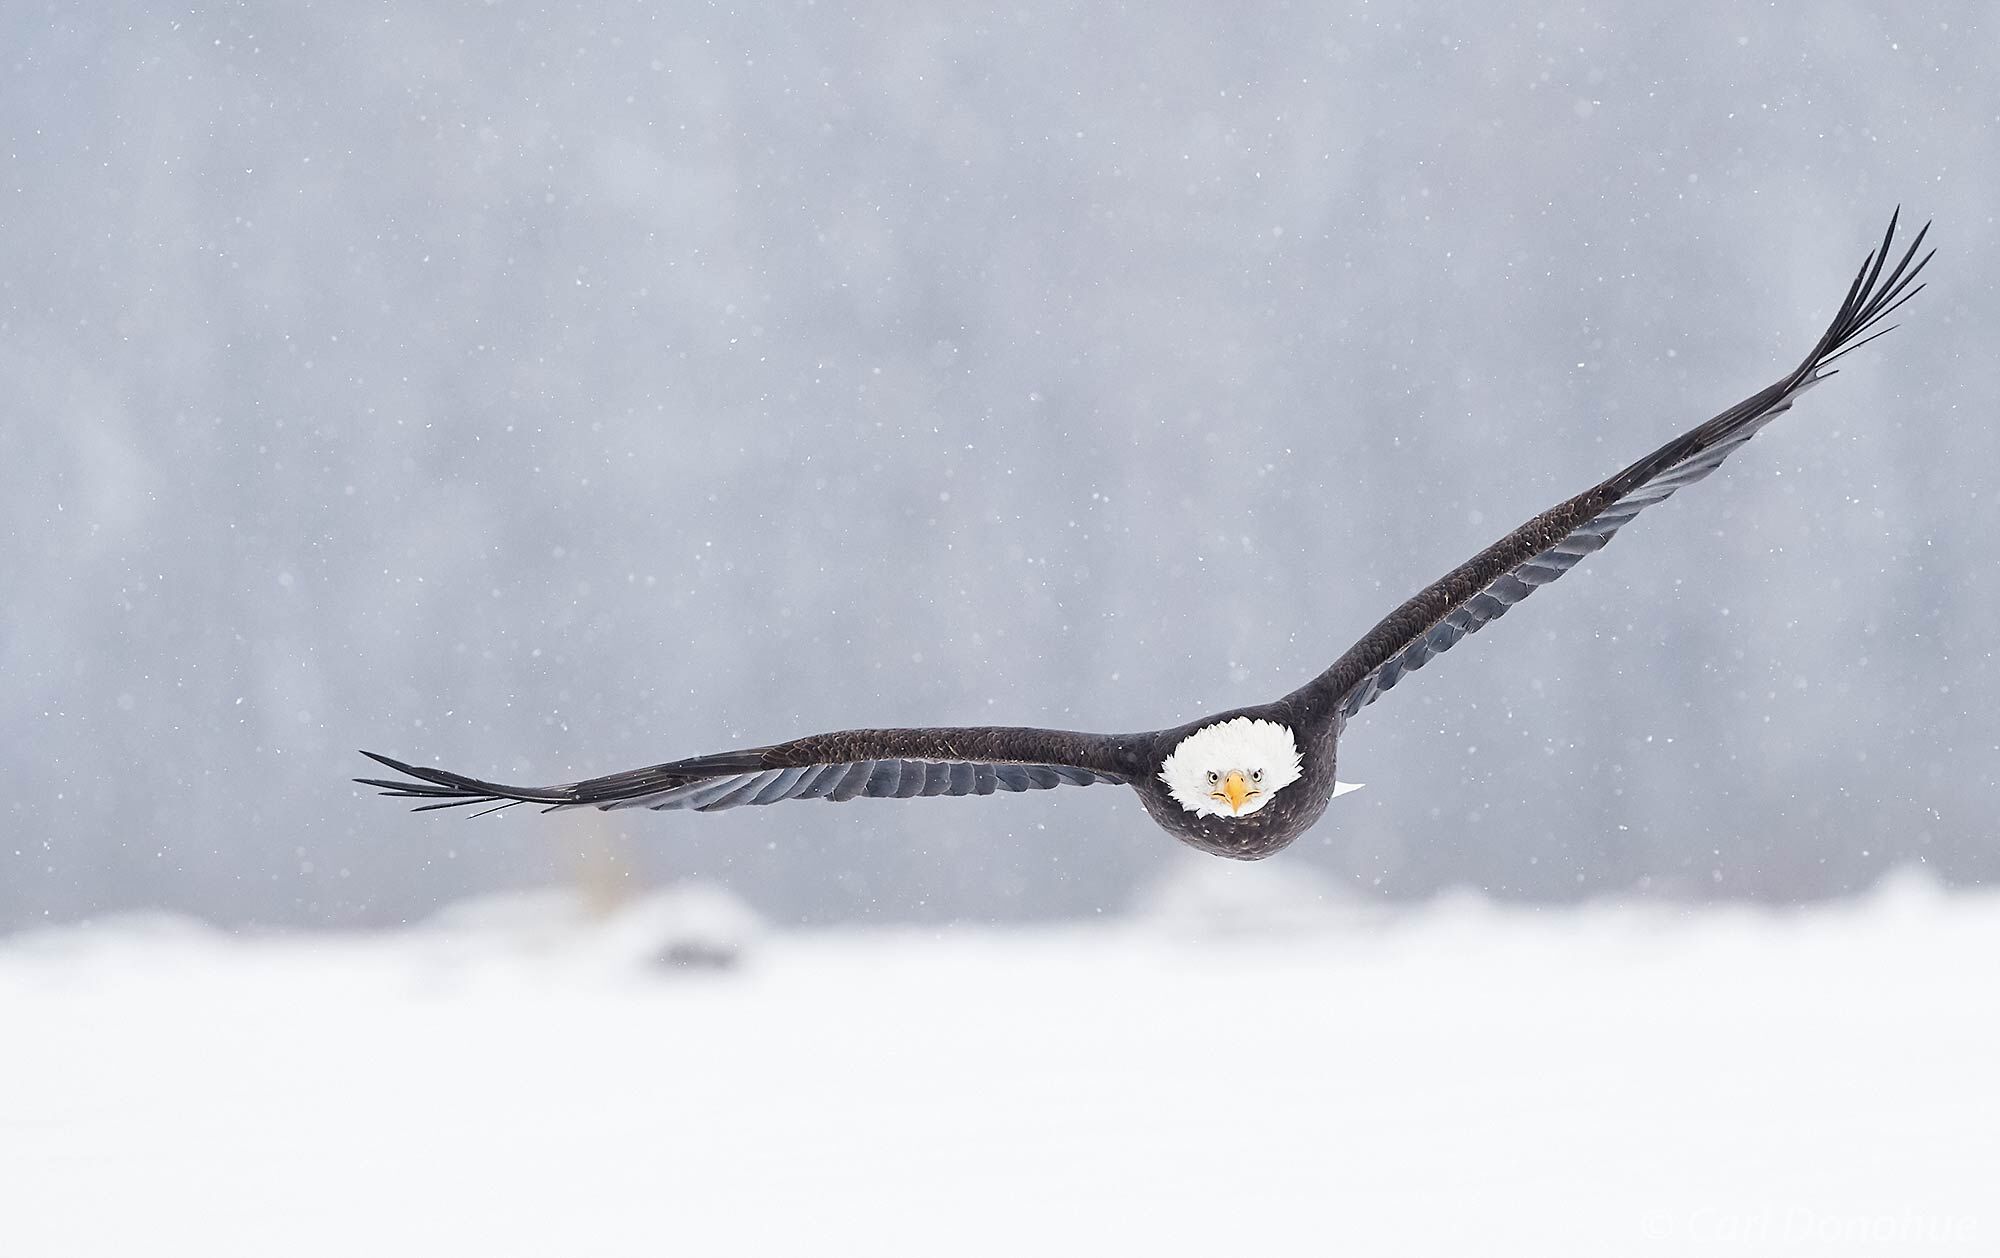 Wings spread, a mature bald eagle in flight over the snow-covered ground in Chilkat River valley, near Haines Alaska, Bald eagles...